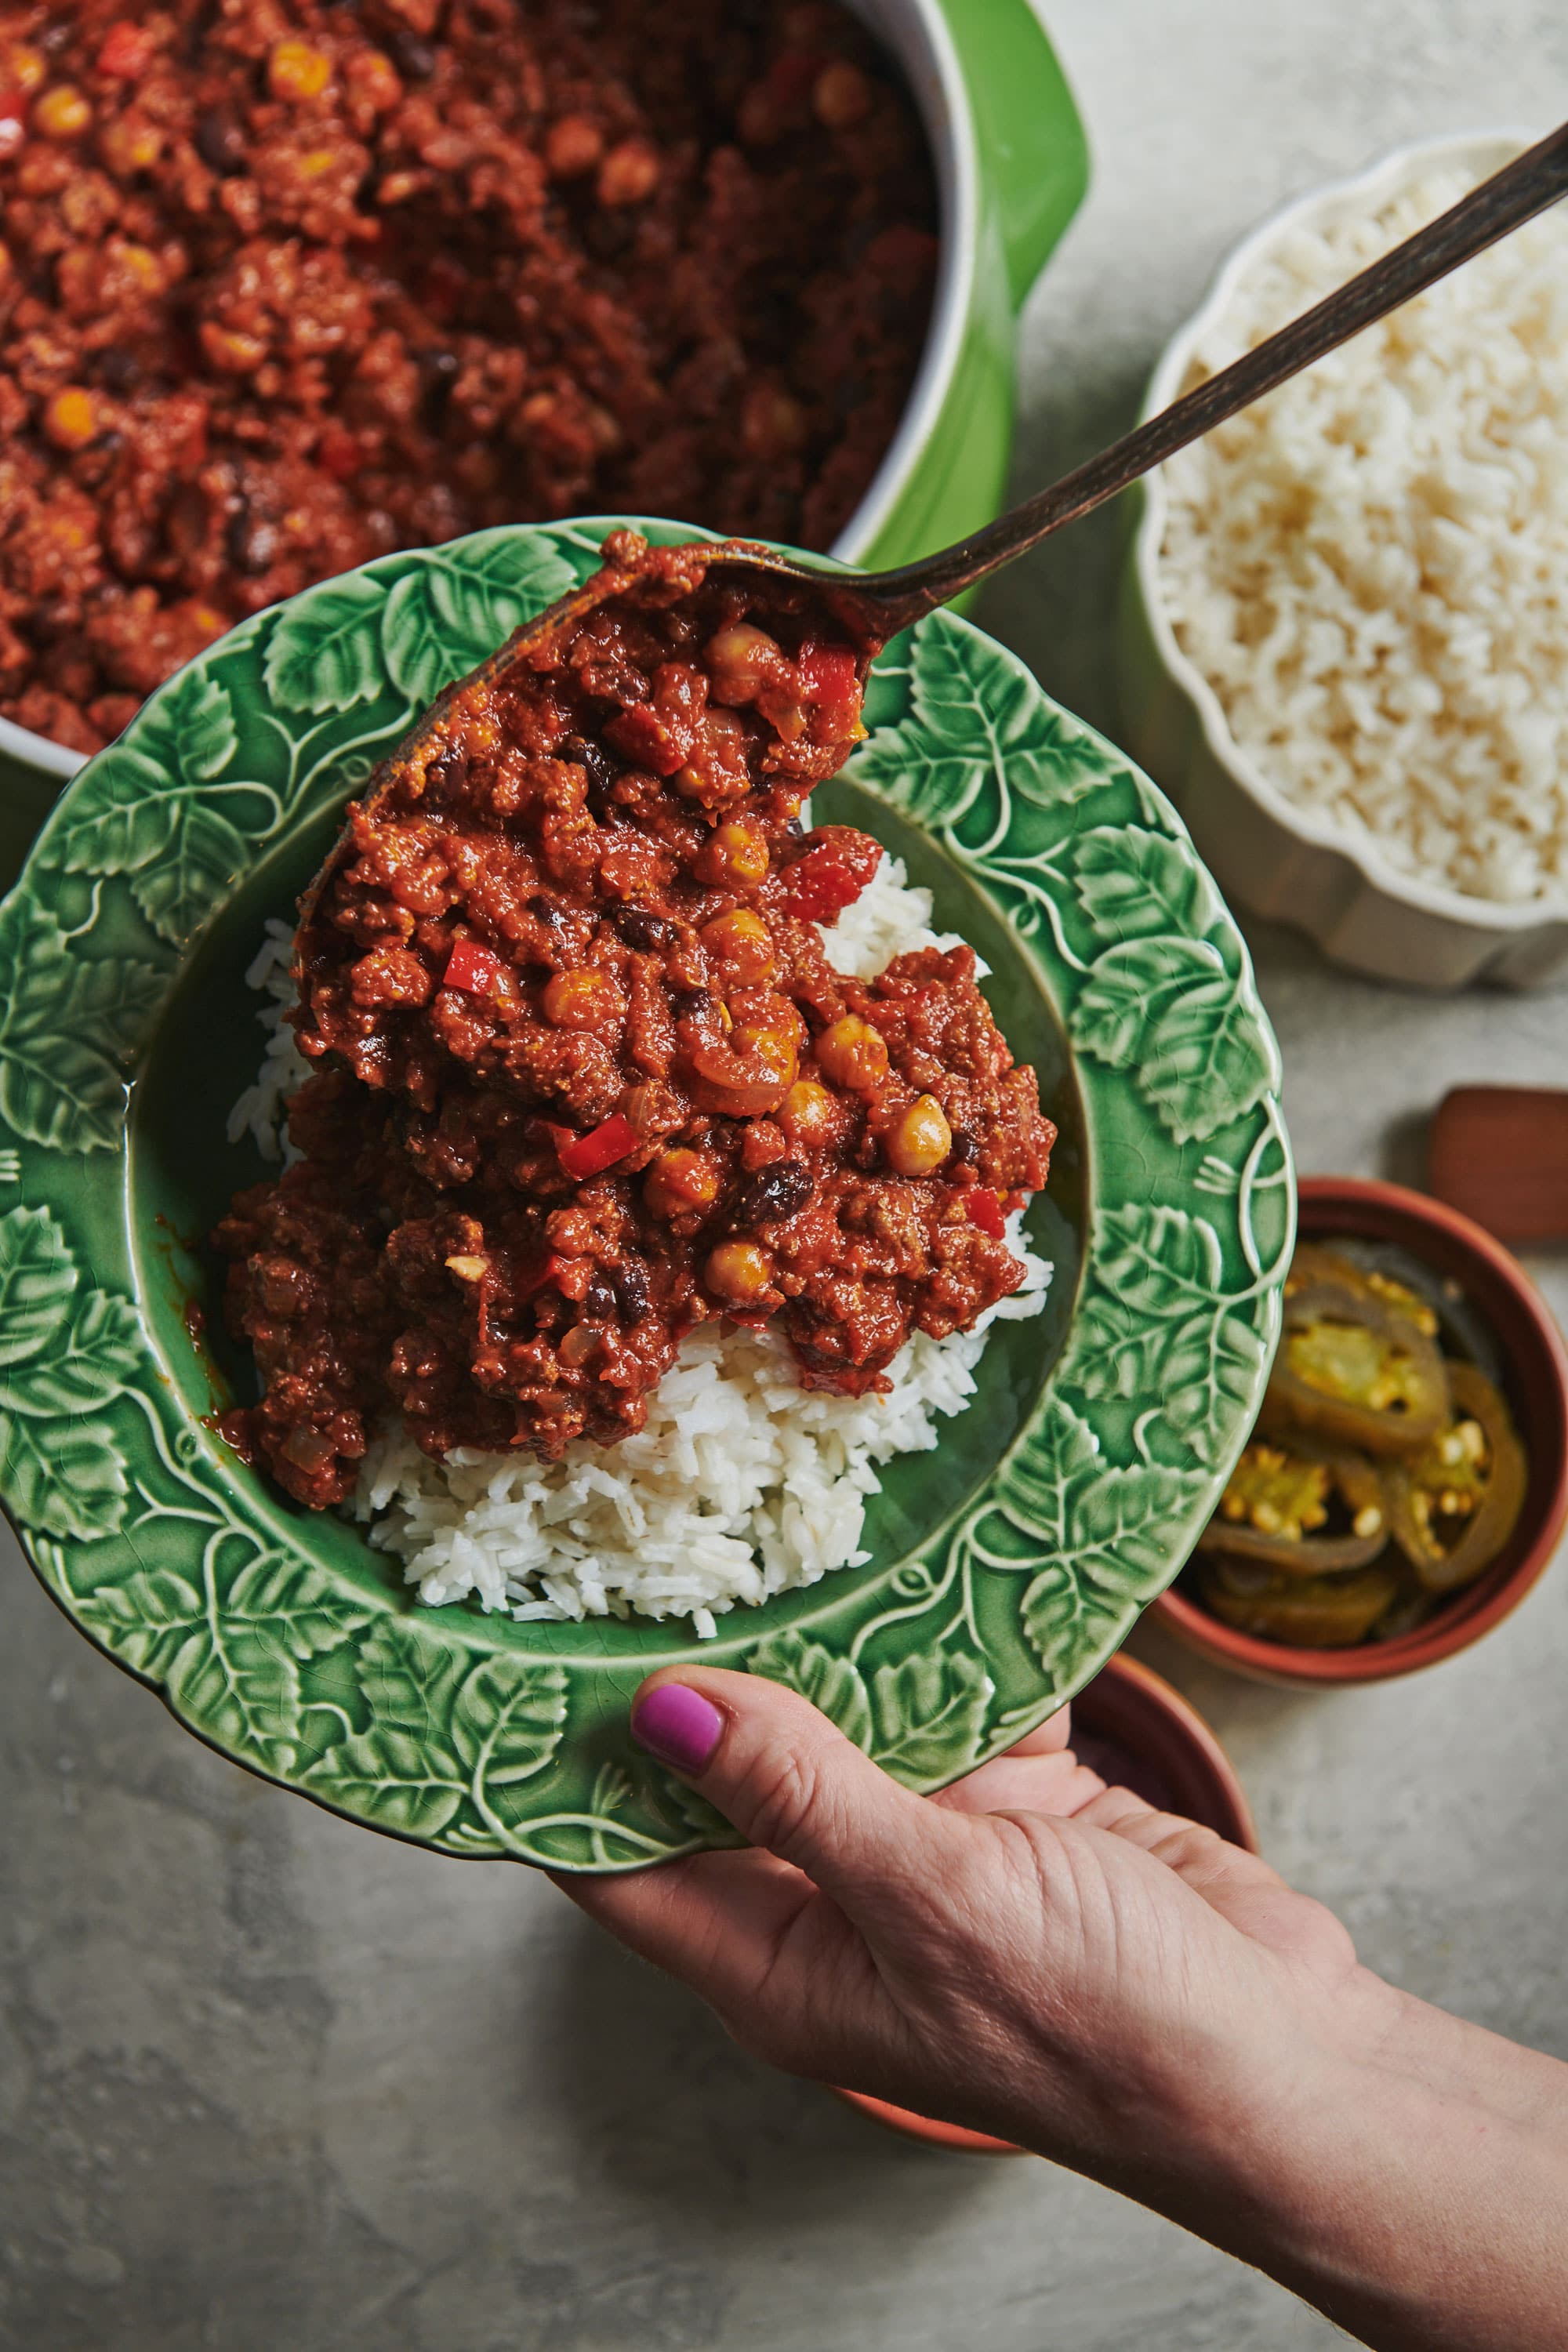 Spoon serving Ground Beef Chili over rice.